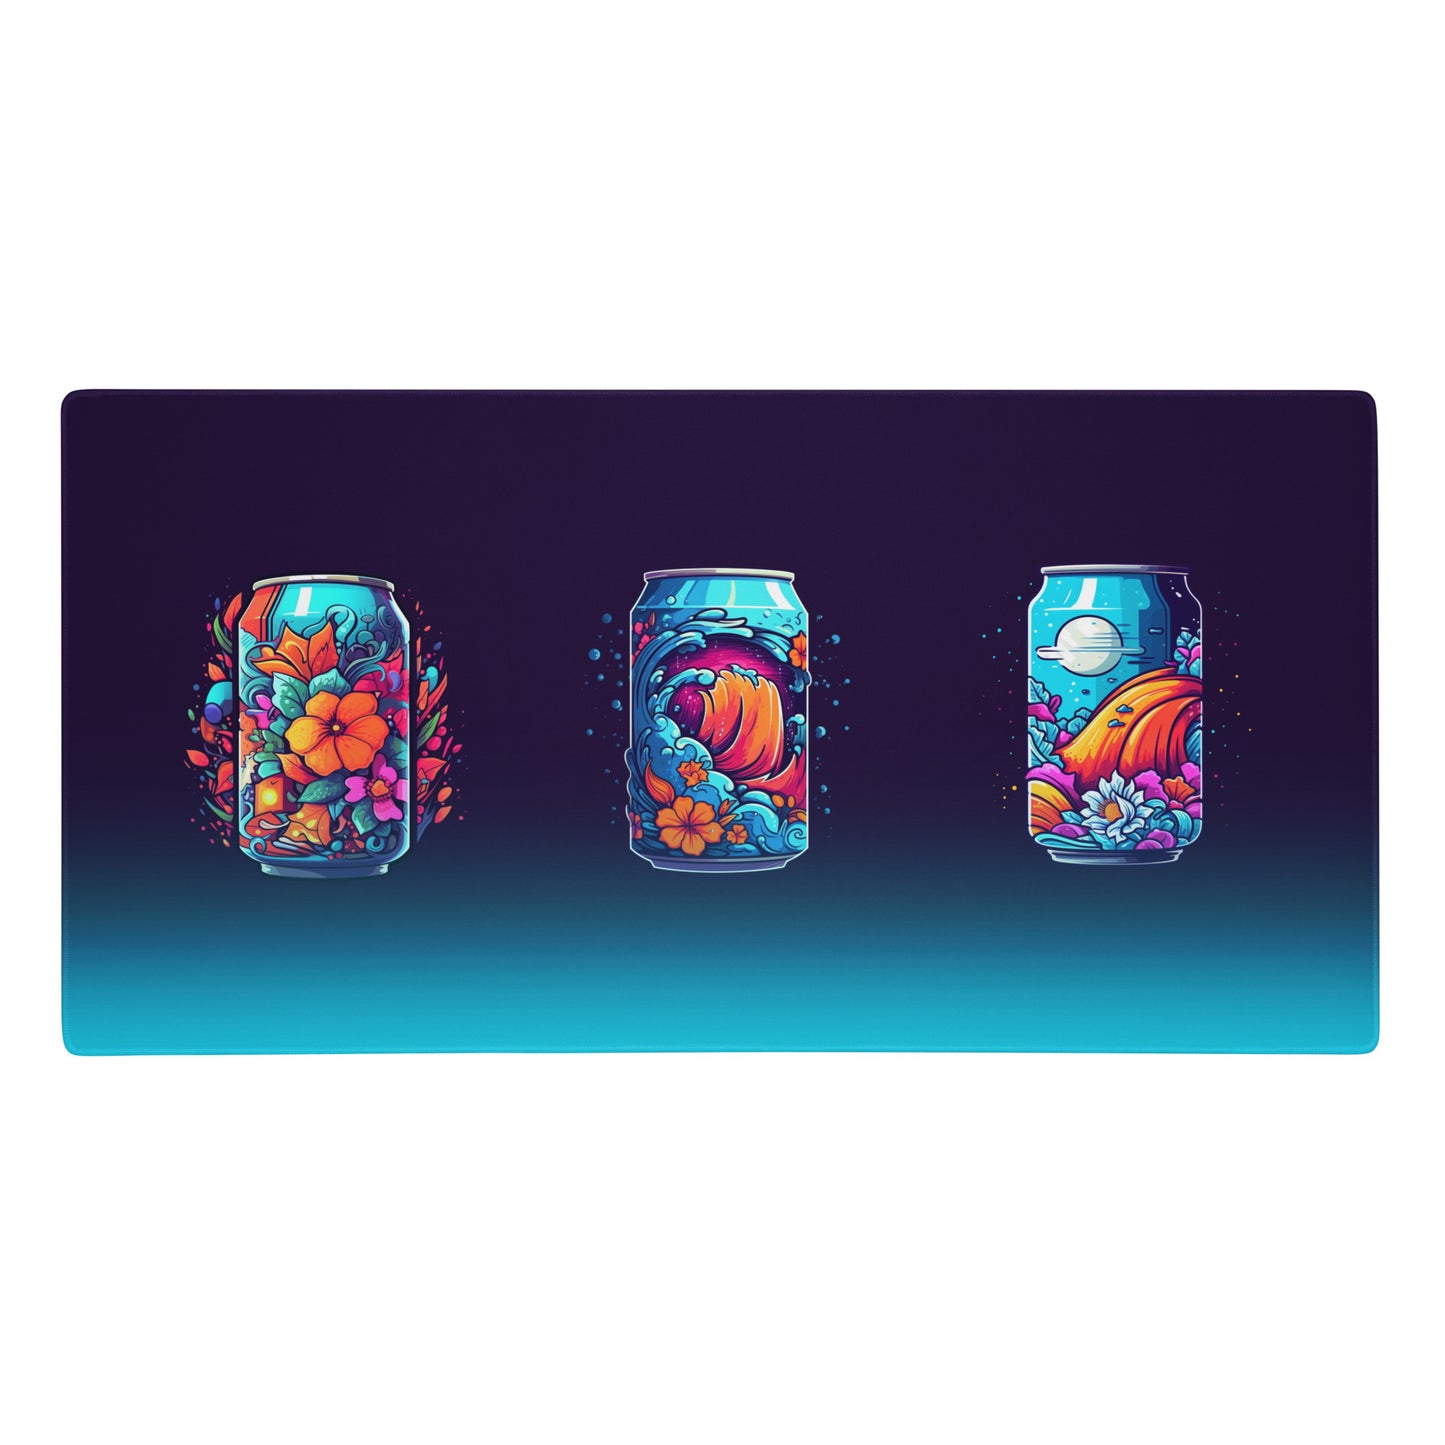 A 36" x 18" desk pad three soda cans that have a floral, wave, or space design.